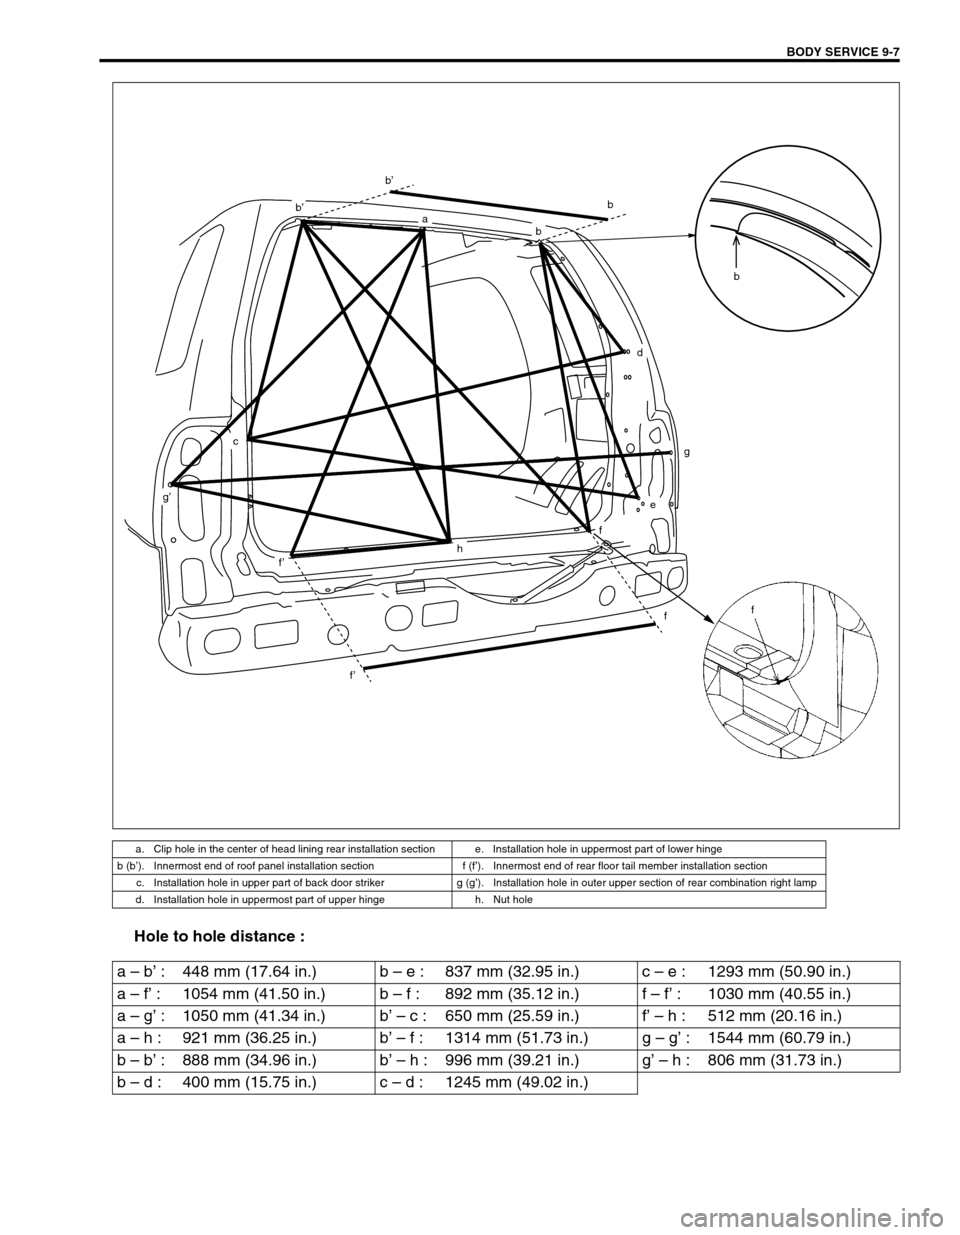 SUZUKI GRAND VITARA 2001 2.G Owners Manual BODY SERVICE 9-7
Hole to hole distance : 
a. Clip hole in the center of head lining rear installation section e. Installation hole in uppermost part of lower hinge
b (b’). Innermost end of roof pane